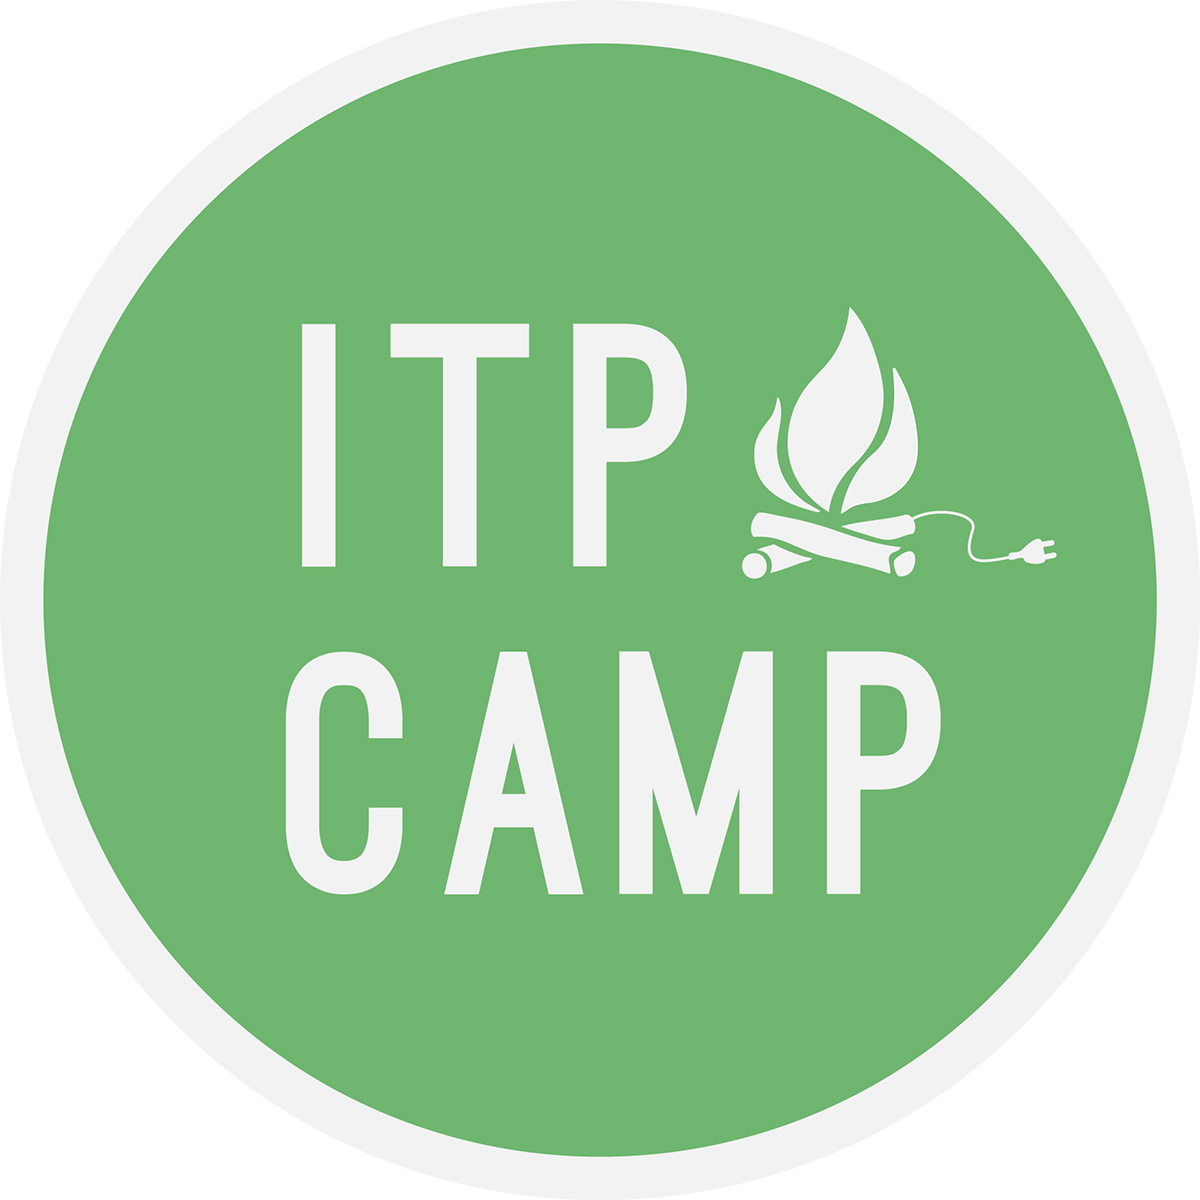 ITP Camp logo with a fire